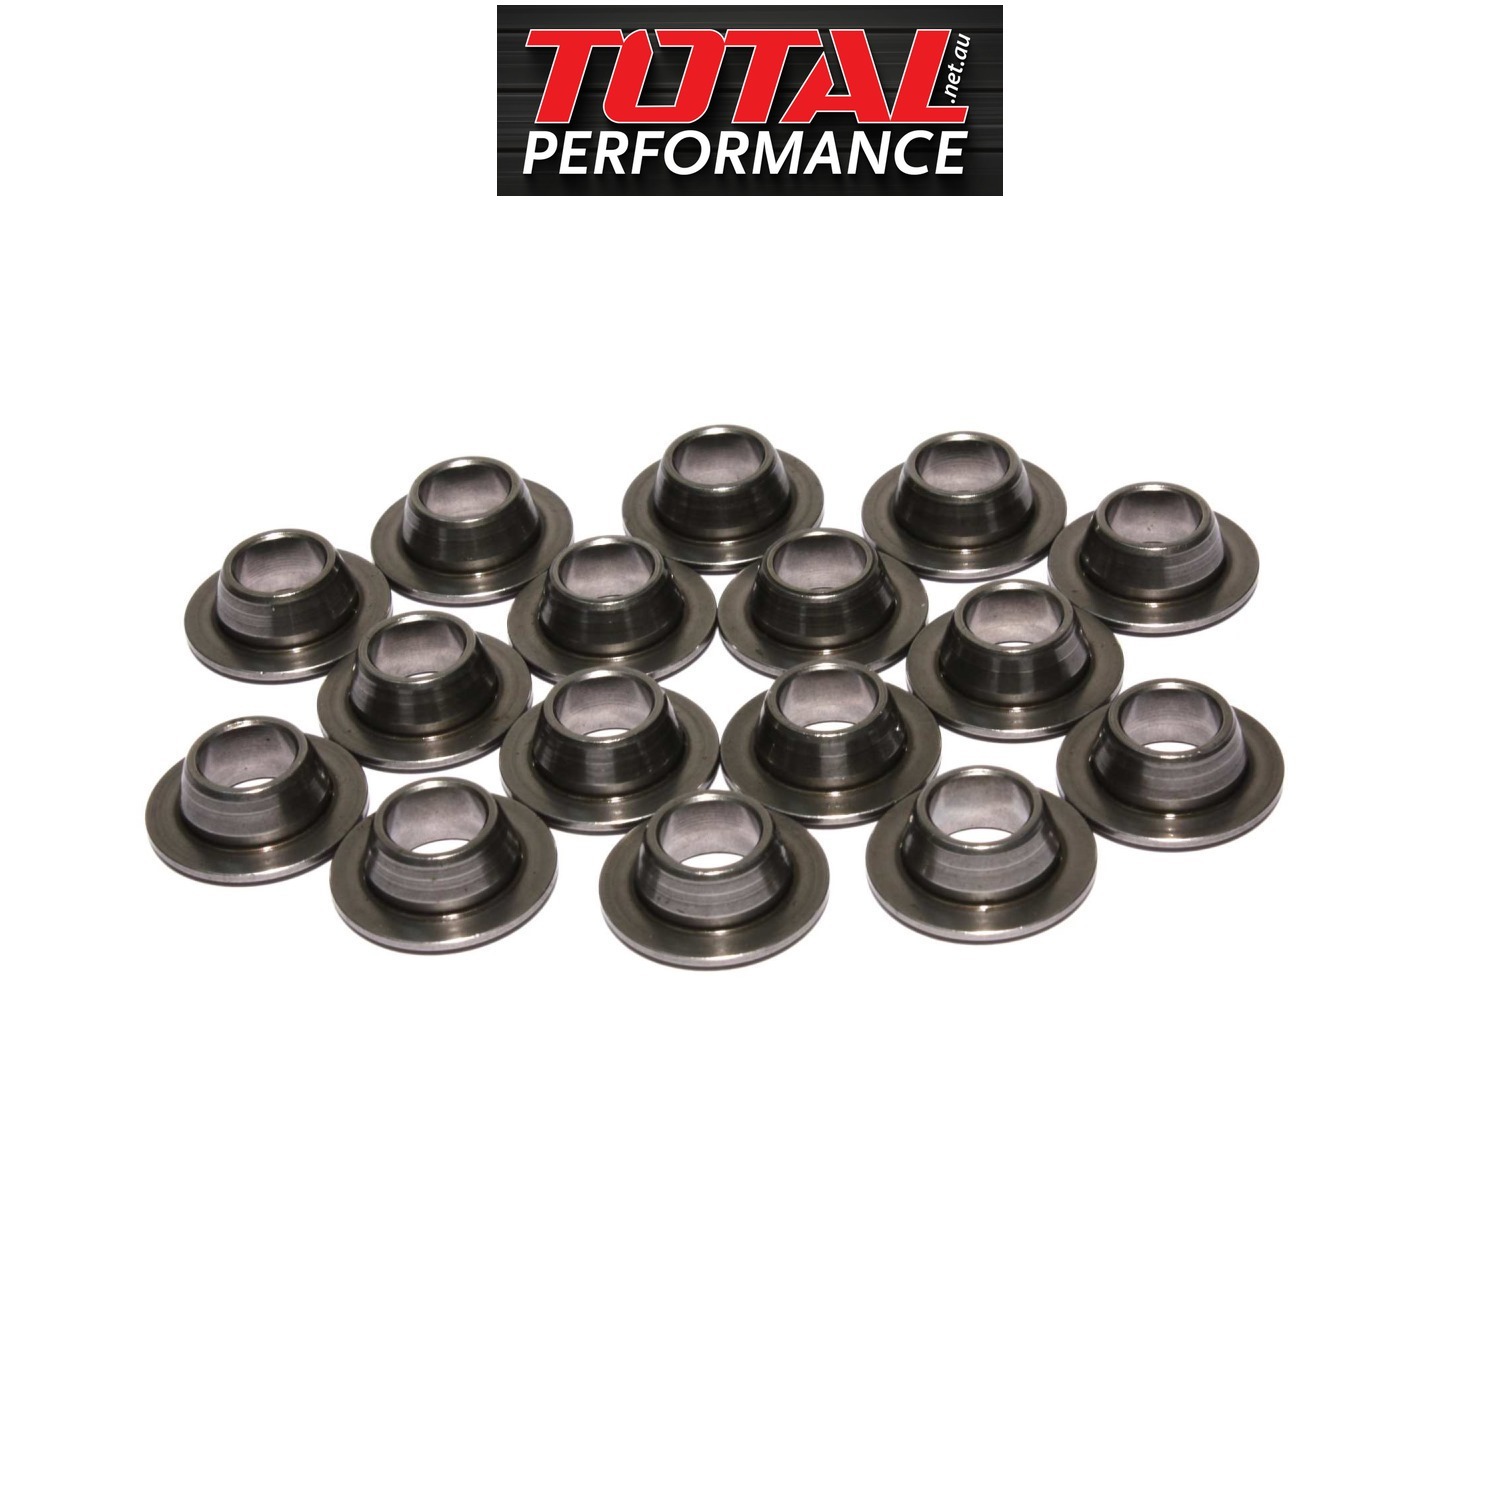 Comp Cams 1787-16 7 Degree Tool Steel Retainers for 11/32